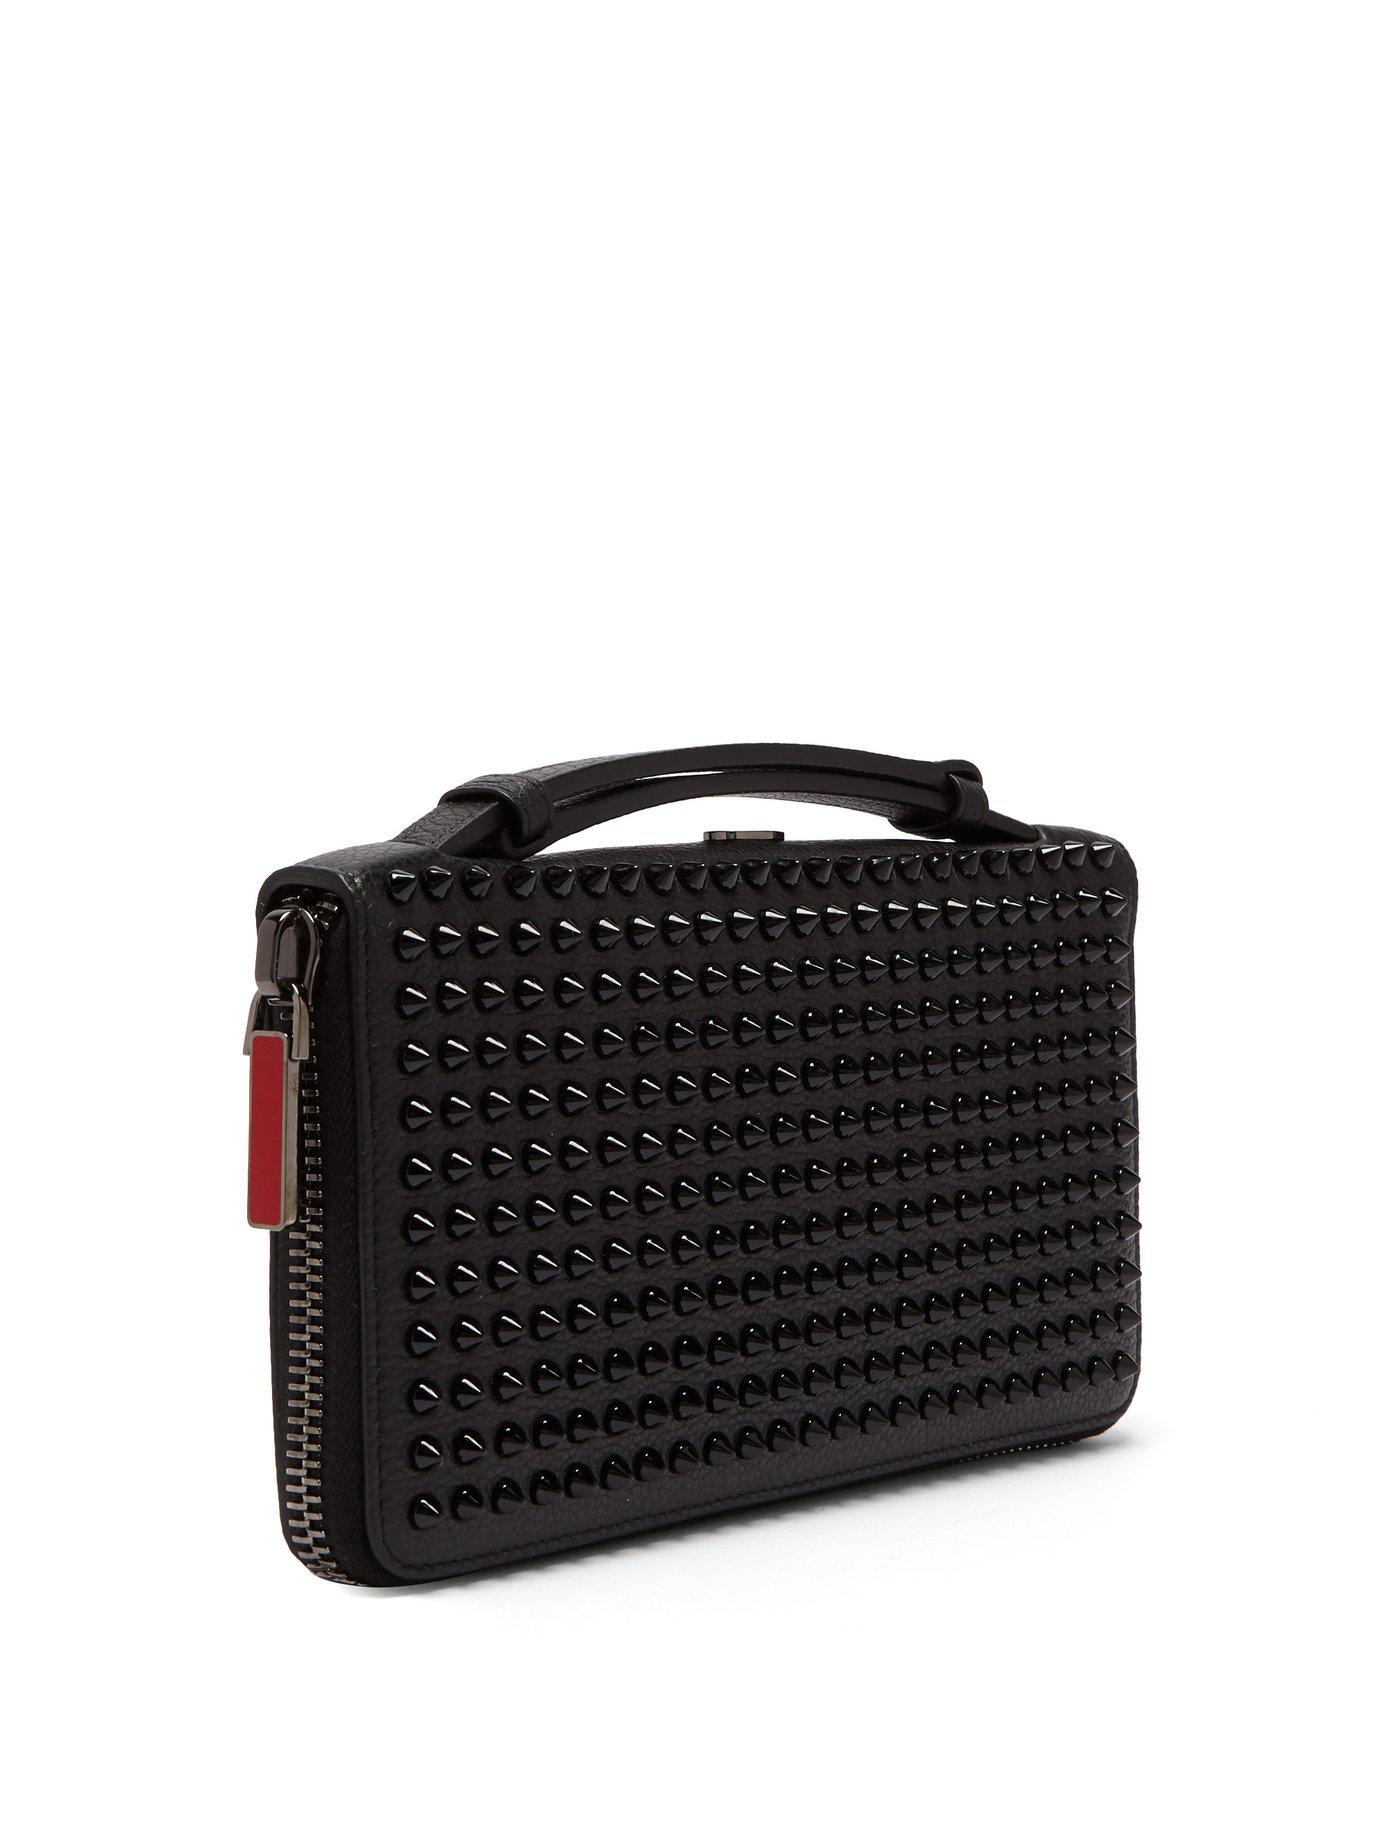 Christian Louboutin Panettone Xl Spike Stud Leather Wallet in Black 